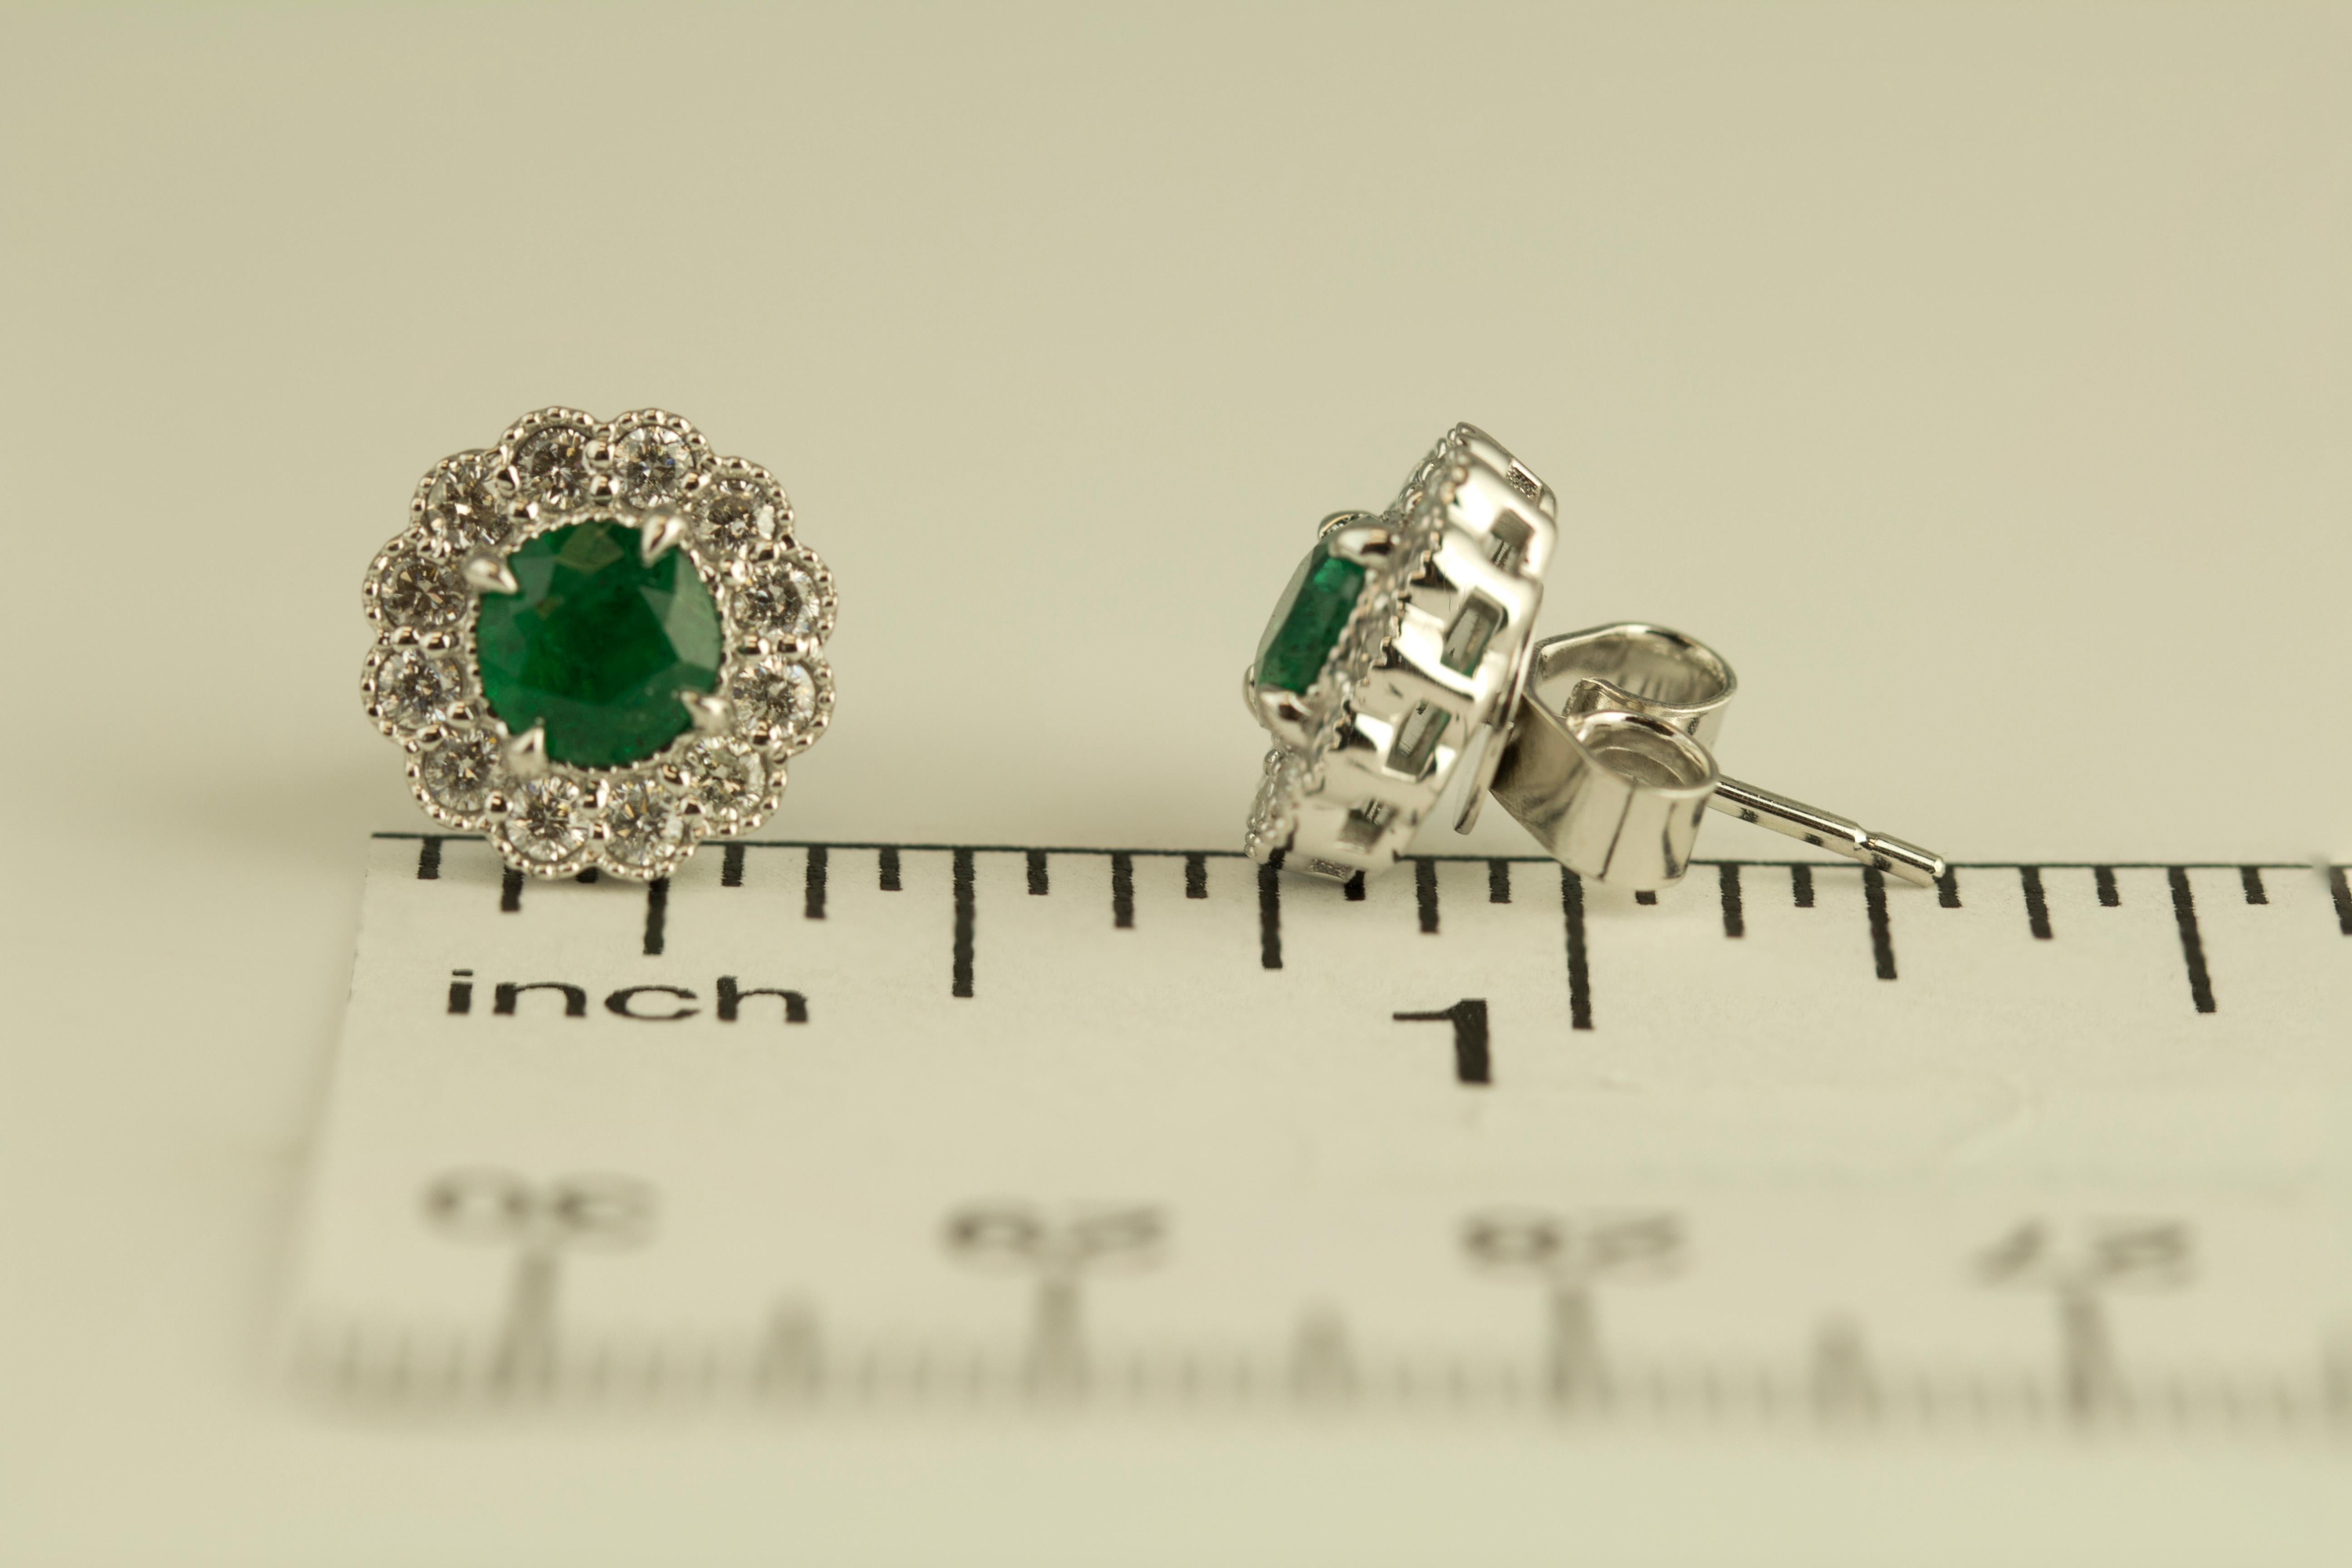 Presenting these stunning earrings showcasing two round-cut emerald centers, enveloped by a halo of round natural diamonds. Delicate milgrain detailing throughout the design enhances its overall floral aesthetic. The total emerald weight is 0.95